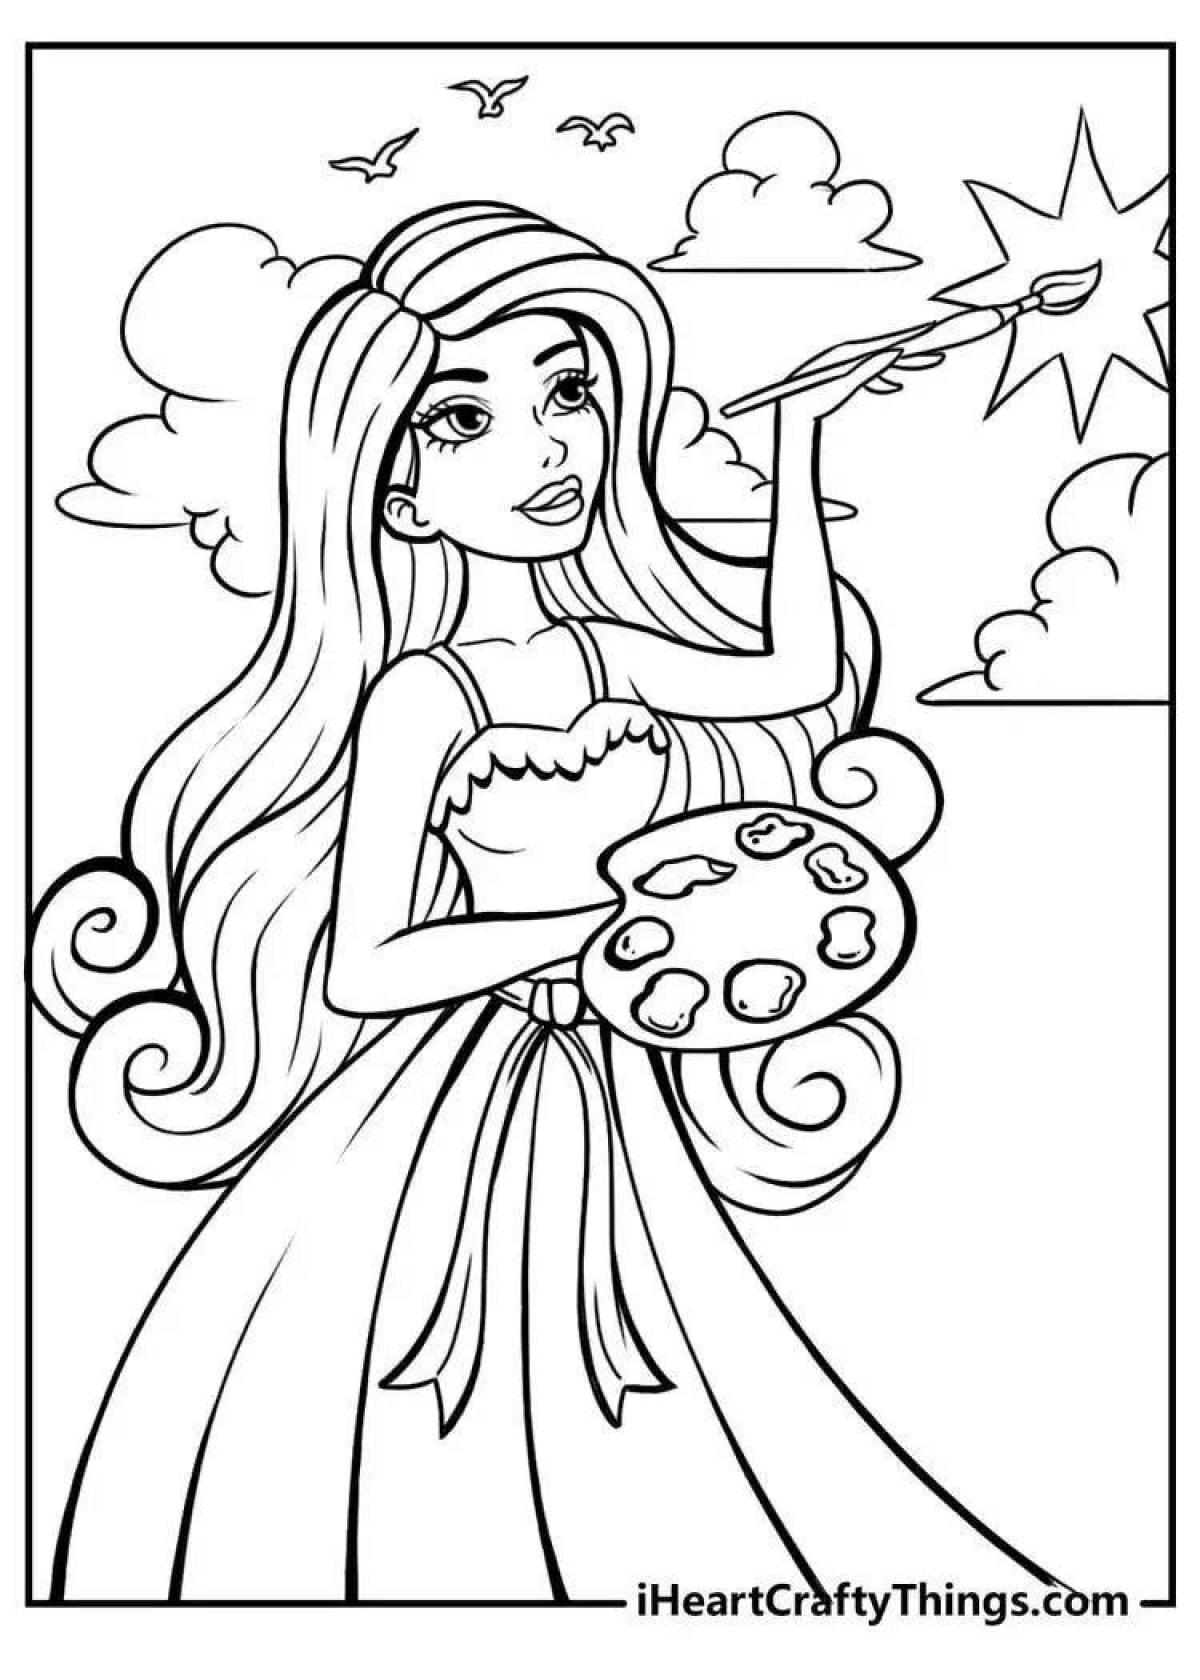 Radiant coloring pages for girls barbie and princess